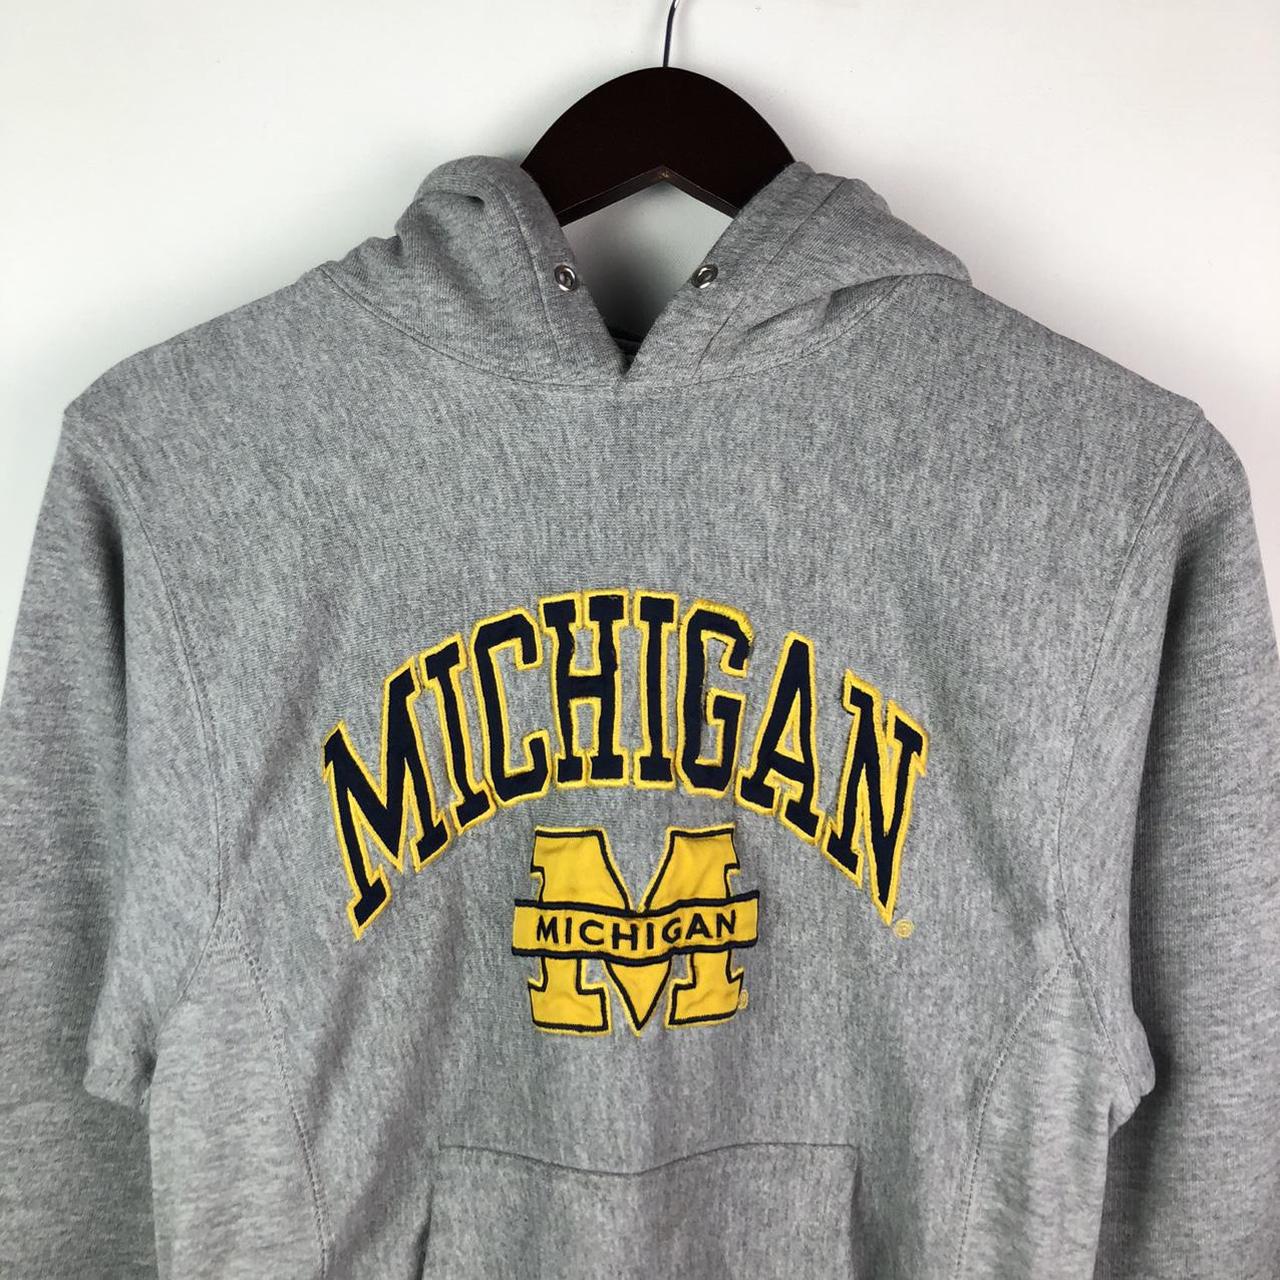 Vintage 90s Steve & Barry’s Michigan State Gray...